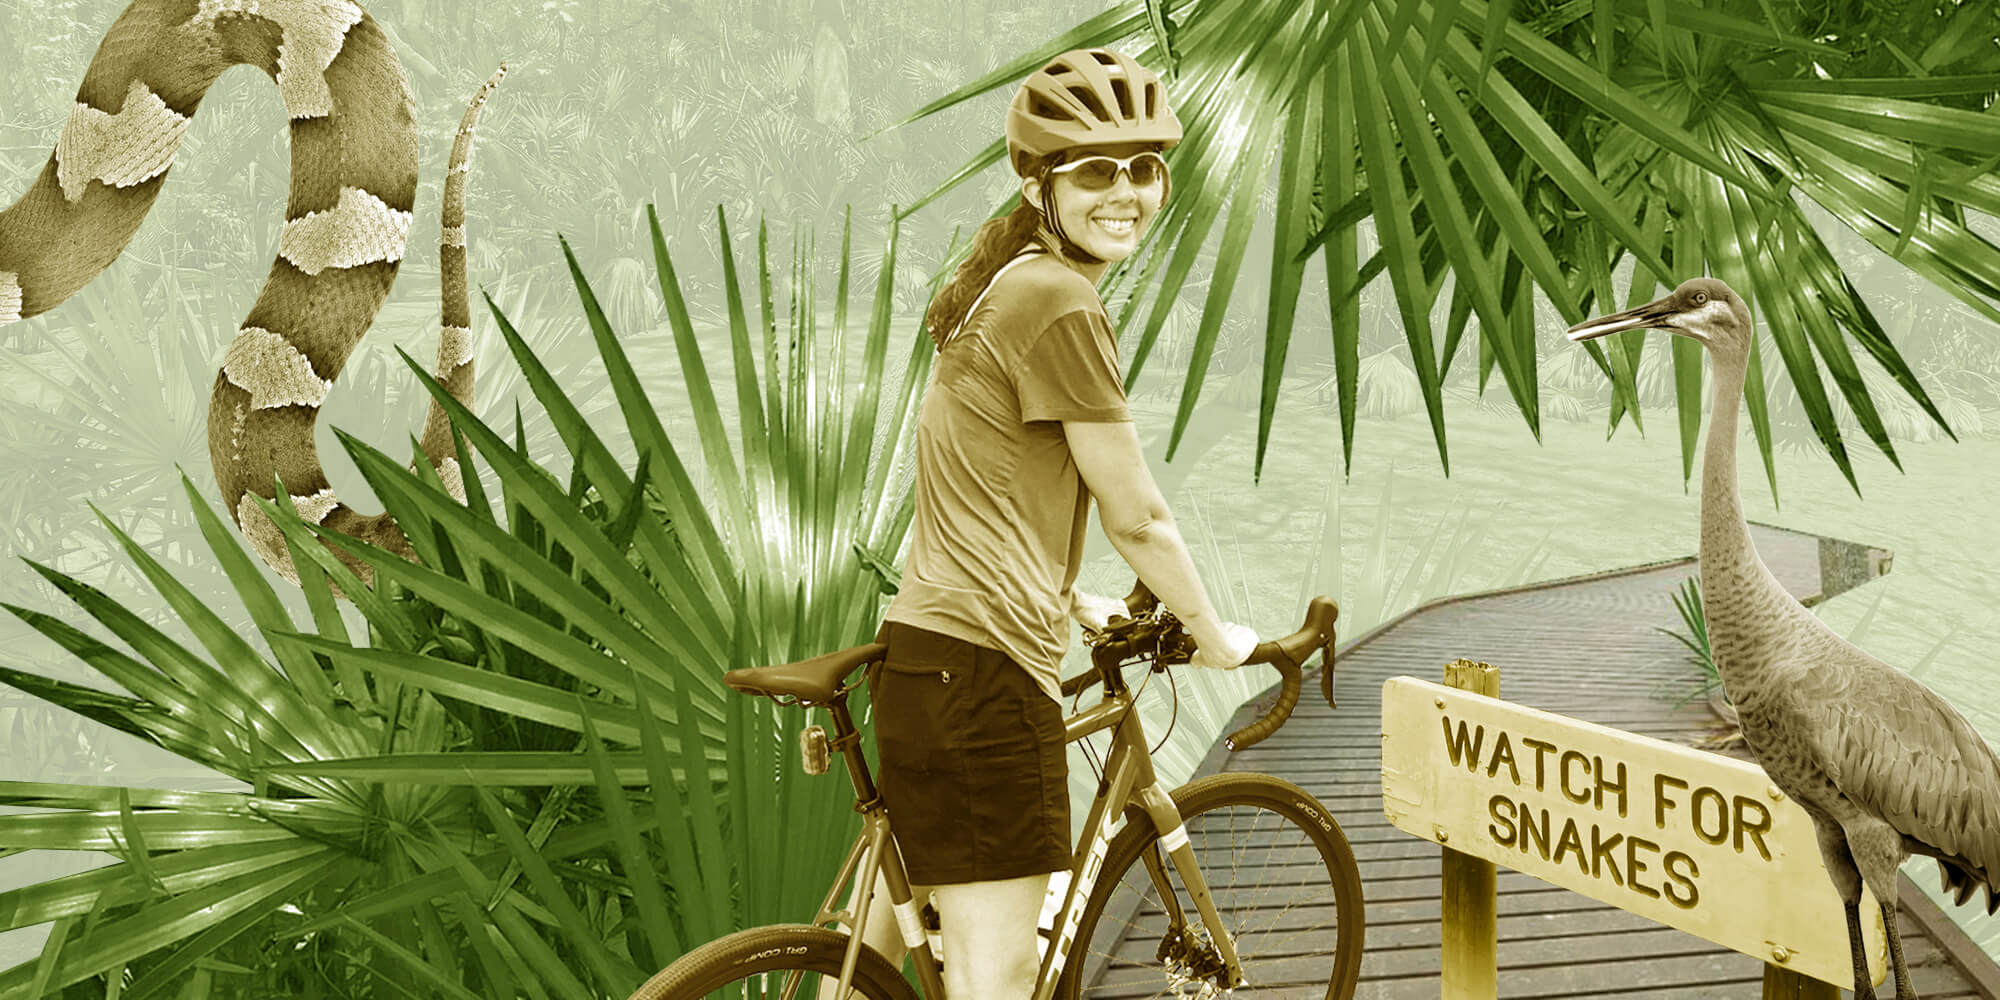 A collage of a person on a bicycle in Palmetto State Park, surrounded by palmetto plants, asnake, and a sign reading "Watch for Snakes"